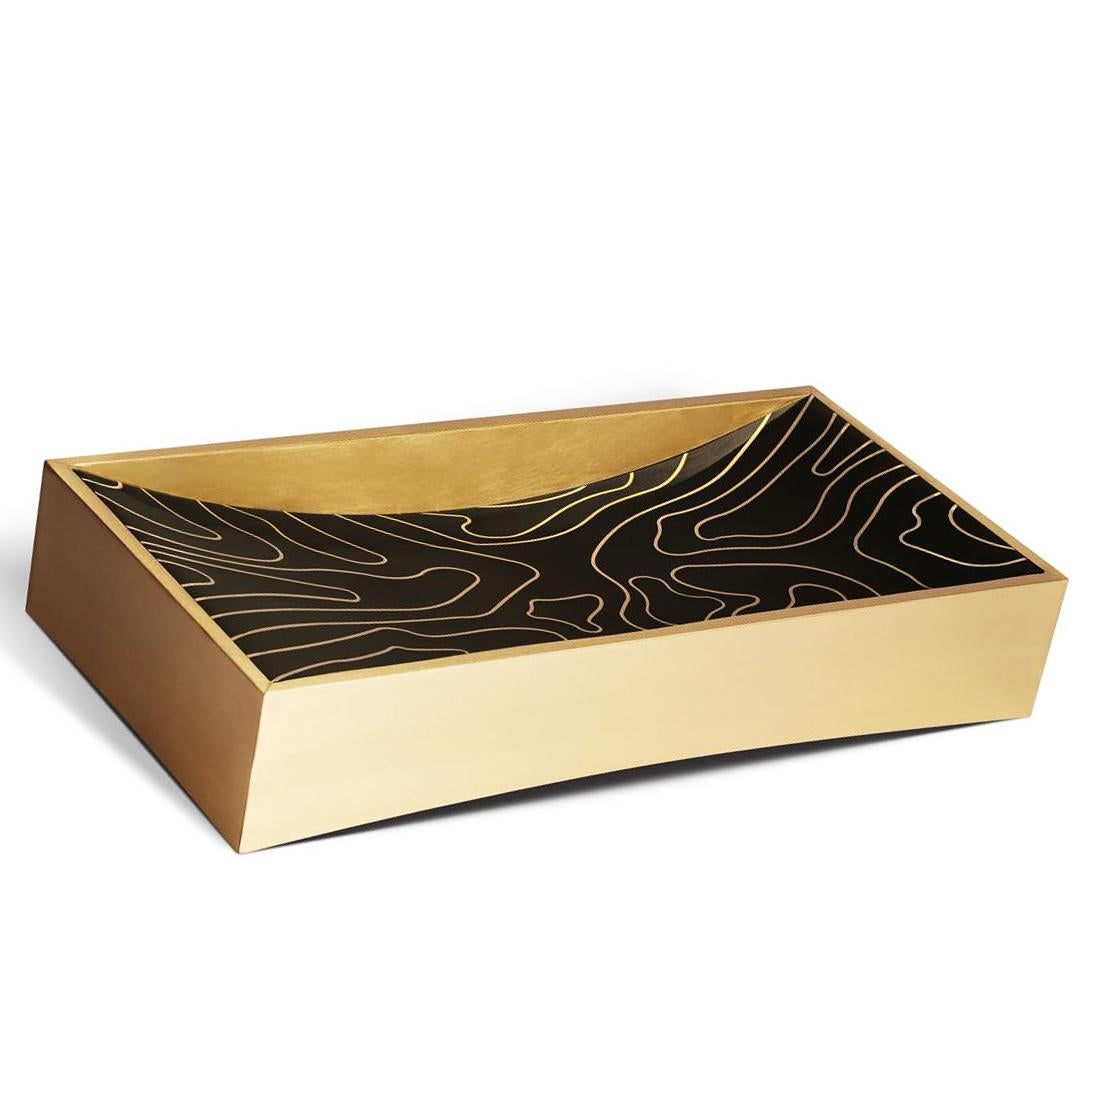 Vide-Poche Athenee in solid brass with black and gilded
and black resin inside. Included in a luxury gift box.